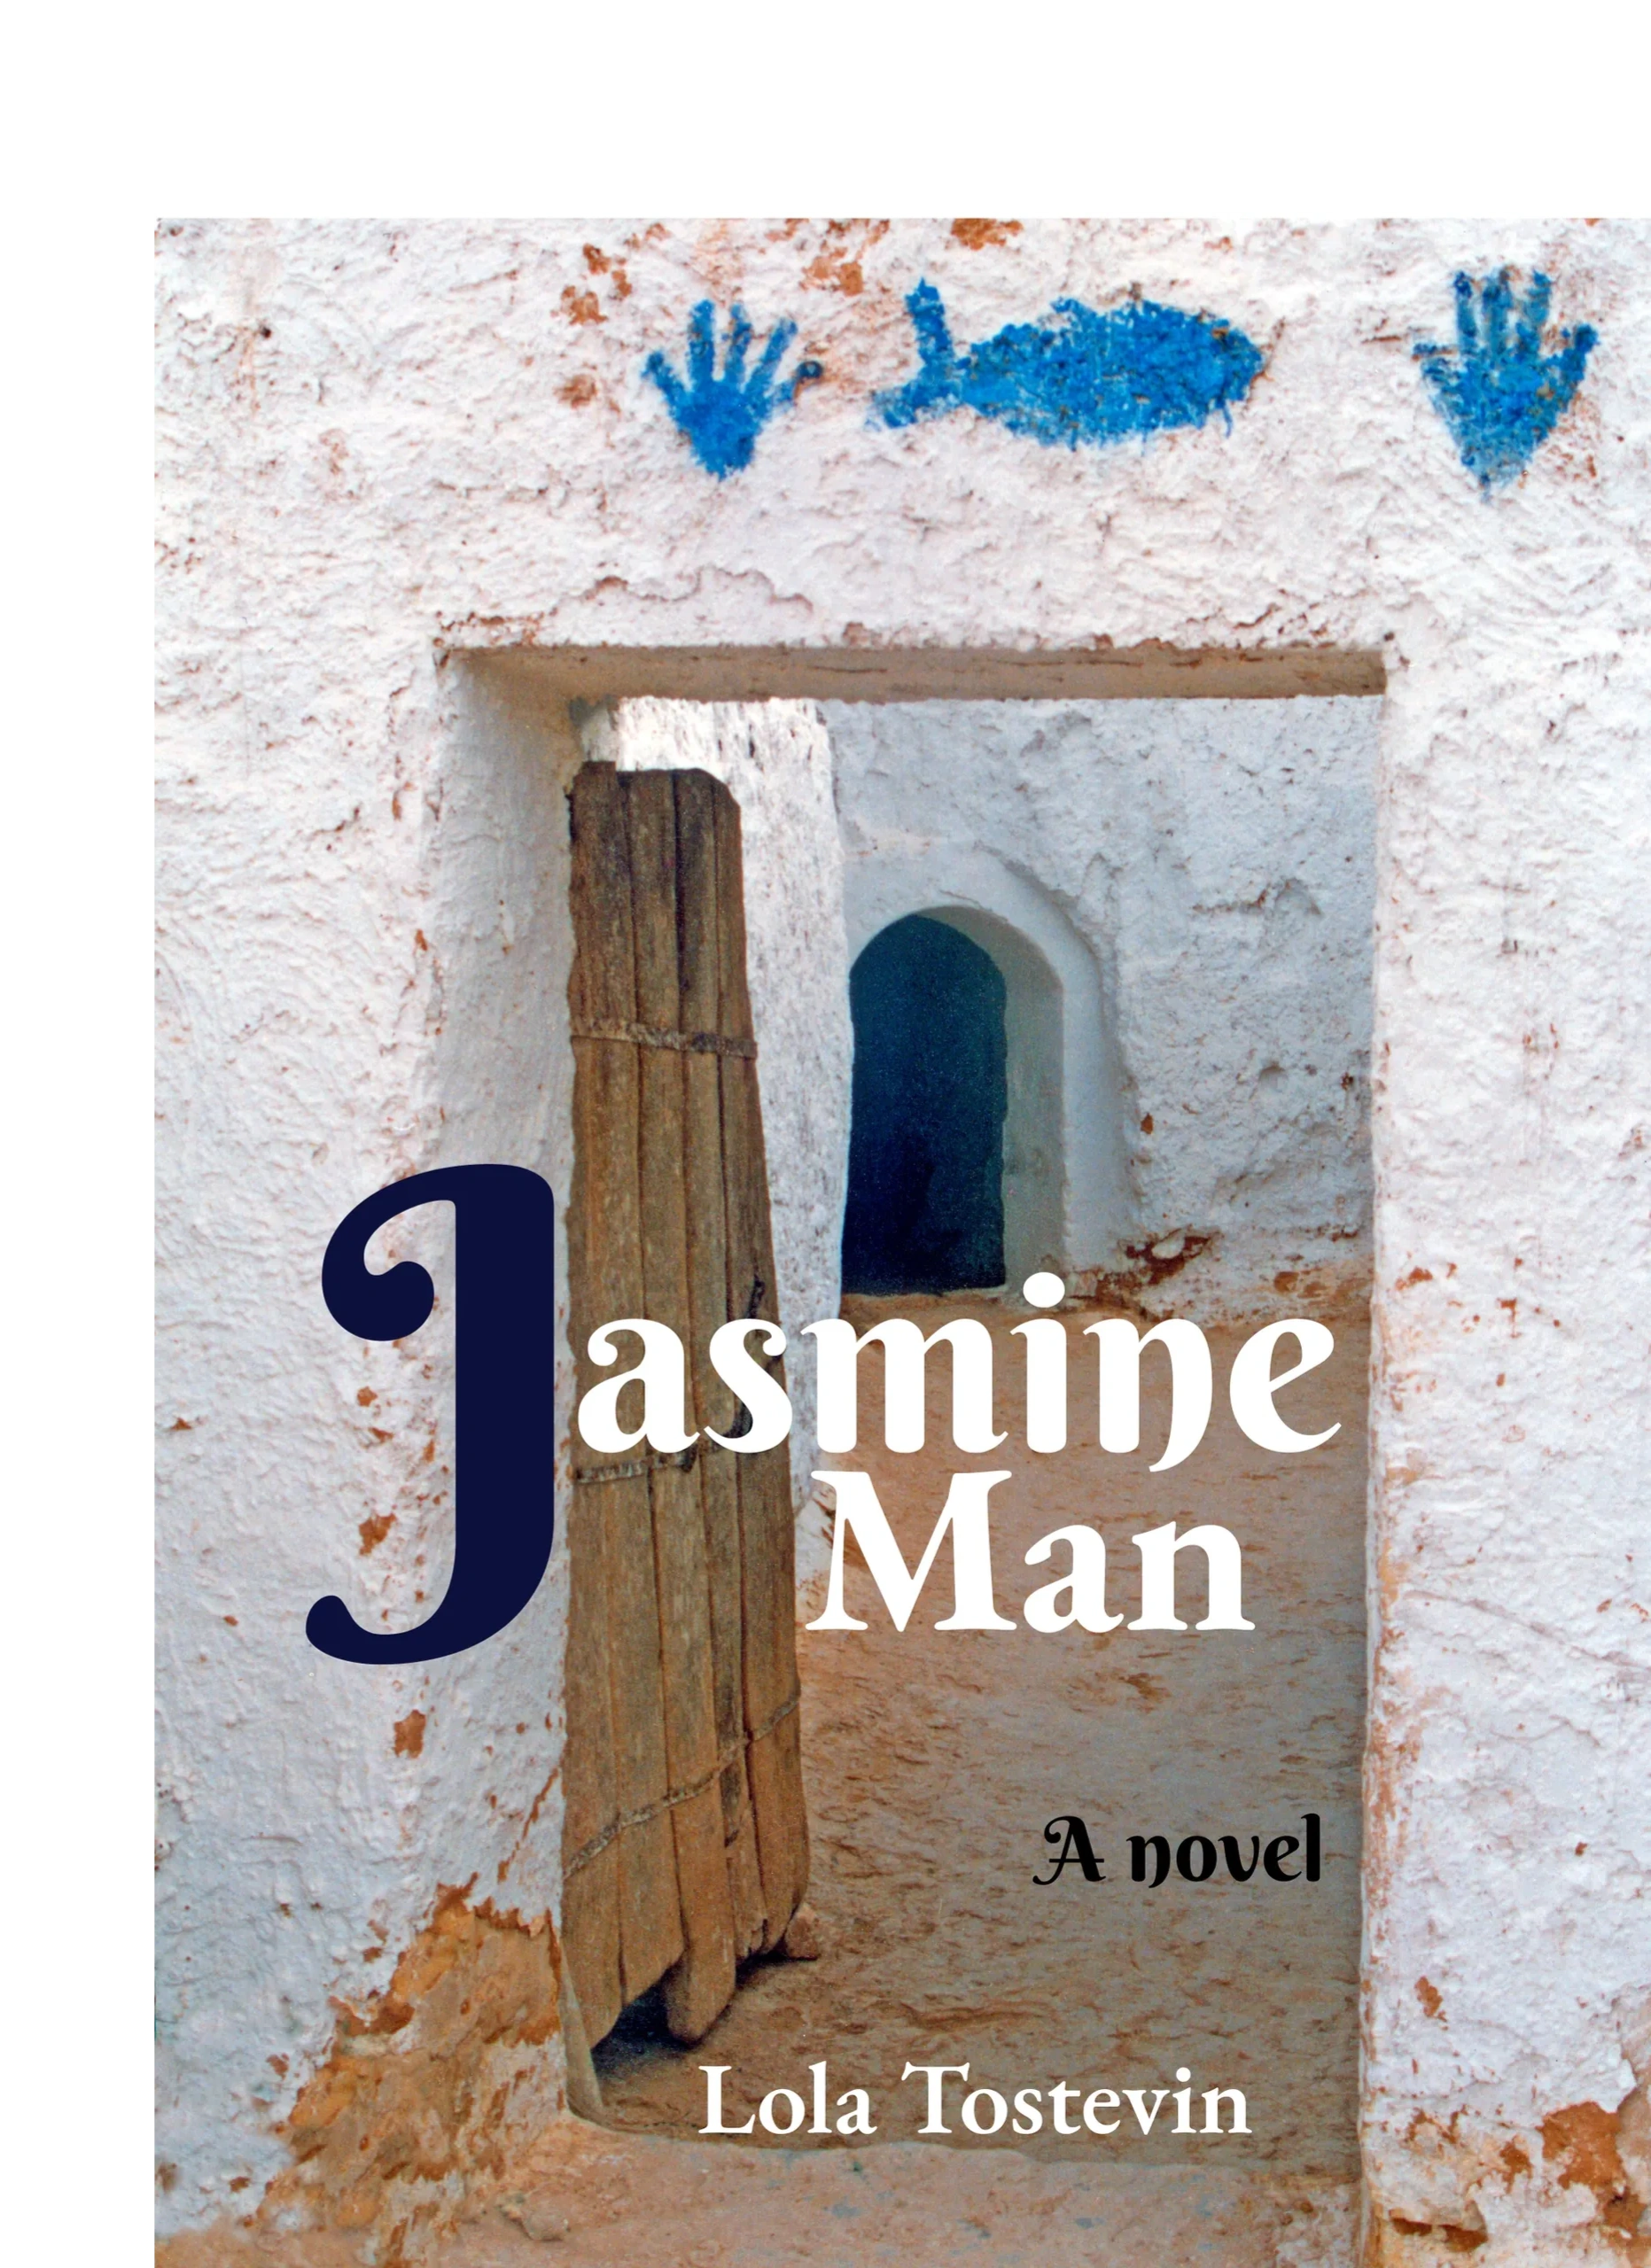 Cover image of the ebook Jasmine Man by Lola Tostevin.